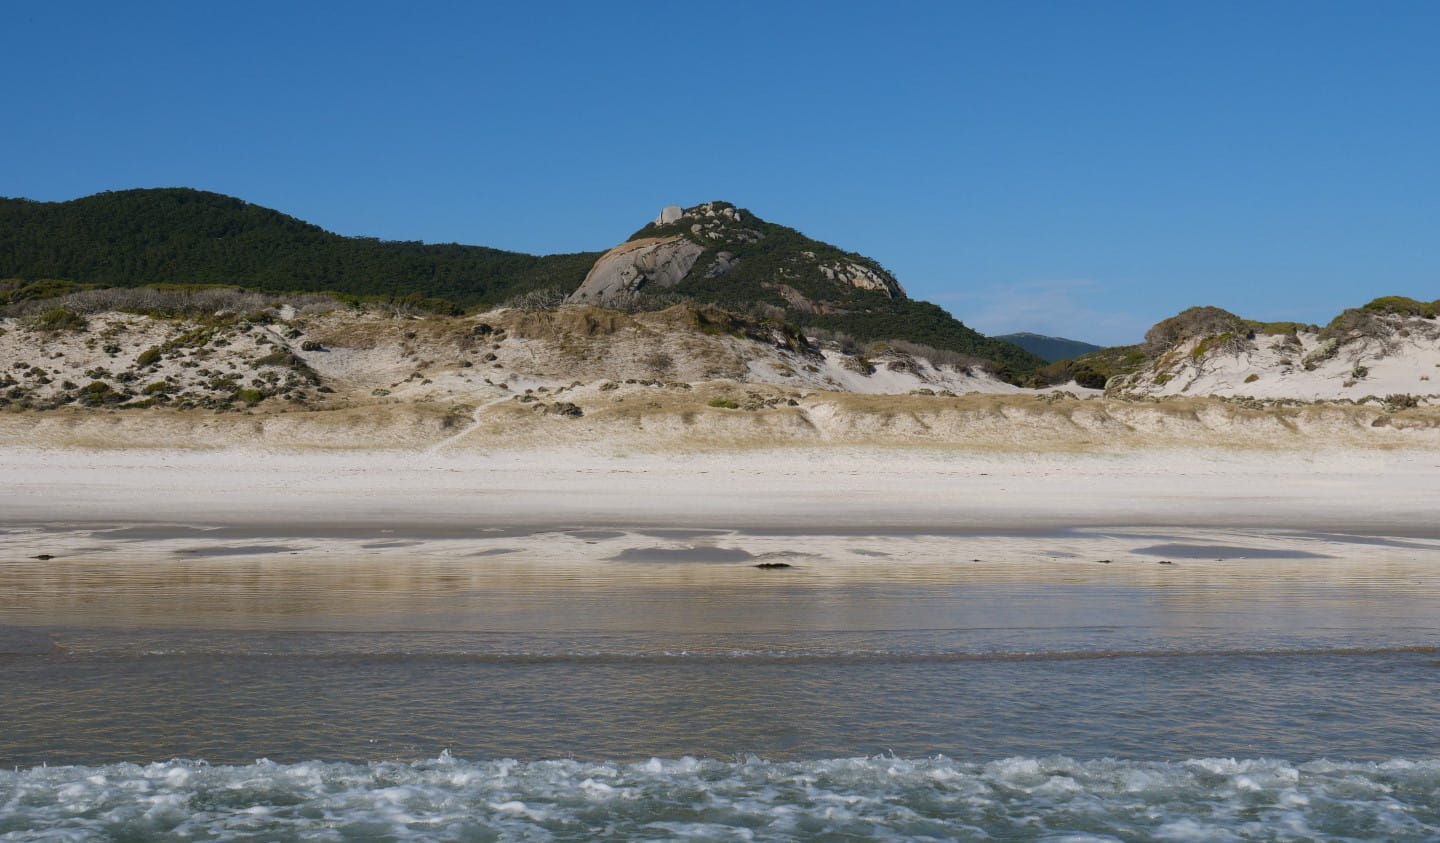 The view of Mount Bishop from Squeaky Beach